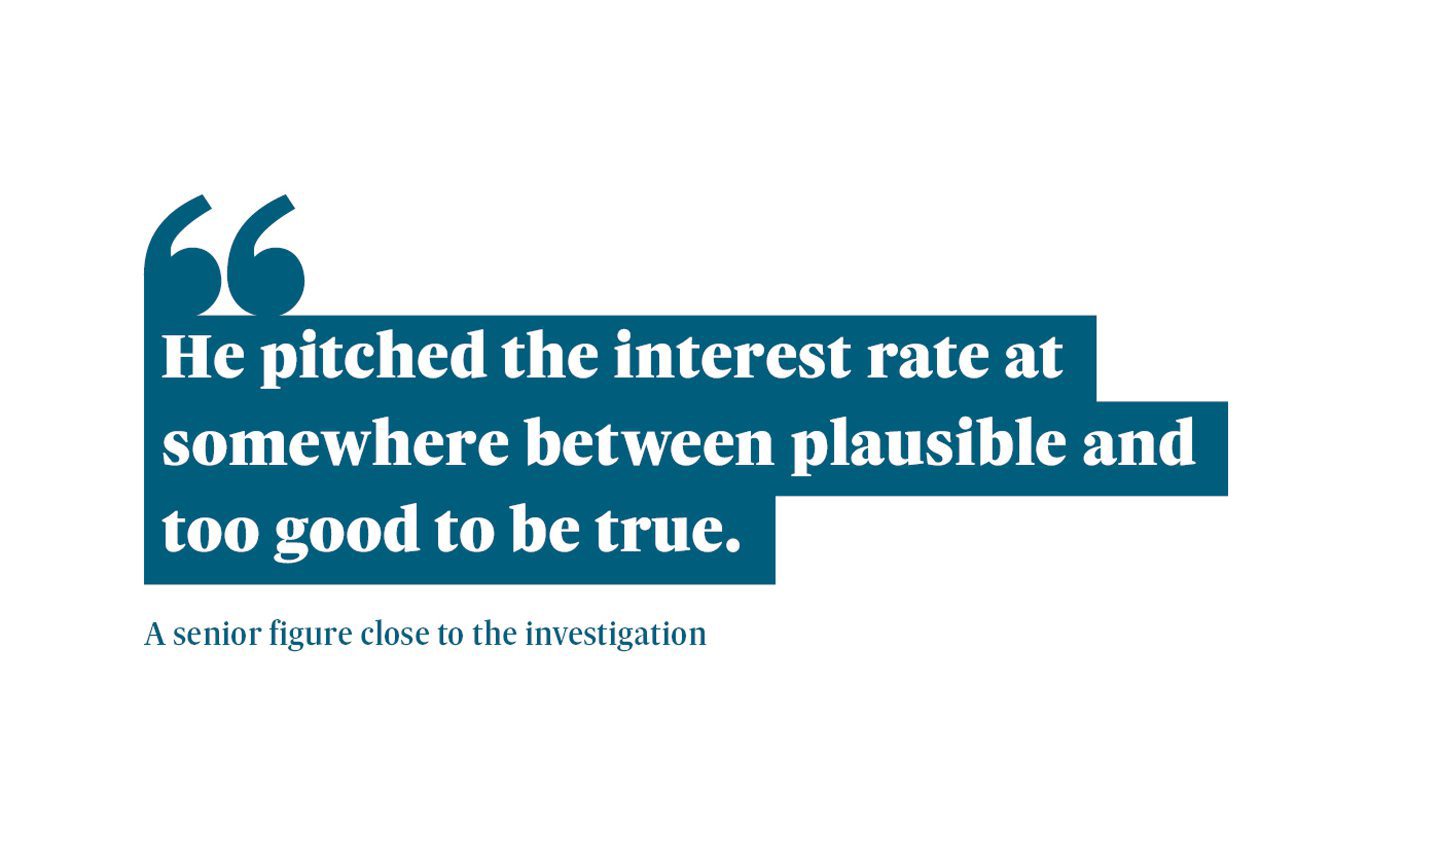 A graphic that reads: “He pitched the interest rate at somewhere between plausible and too good to be true.” from a senior figure close to the investigation.